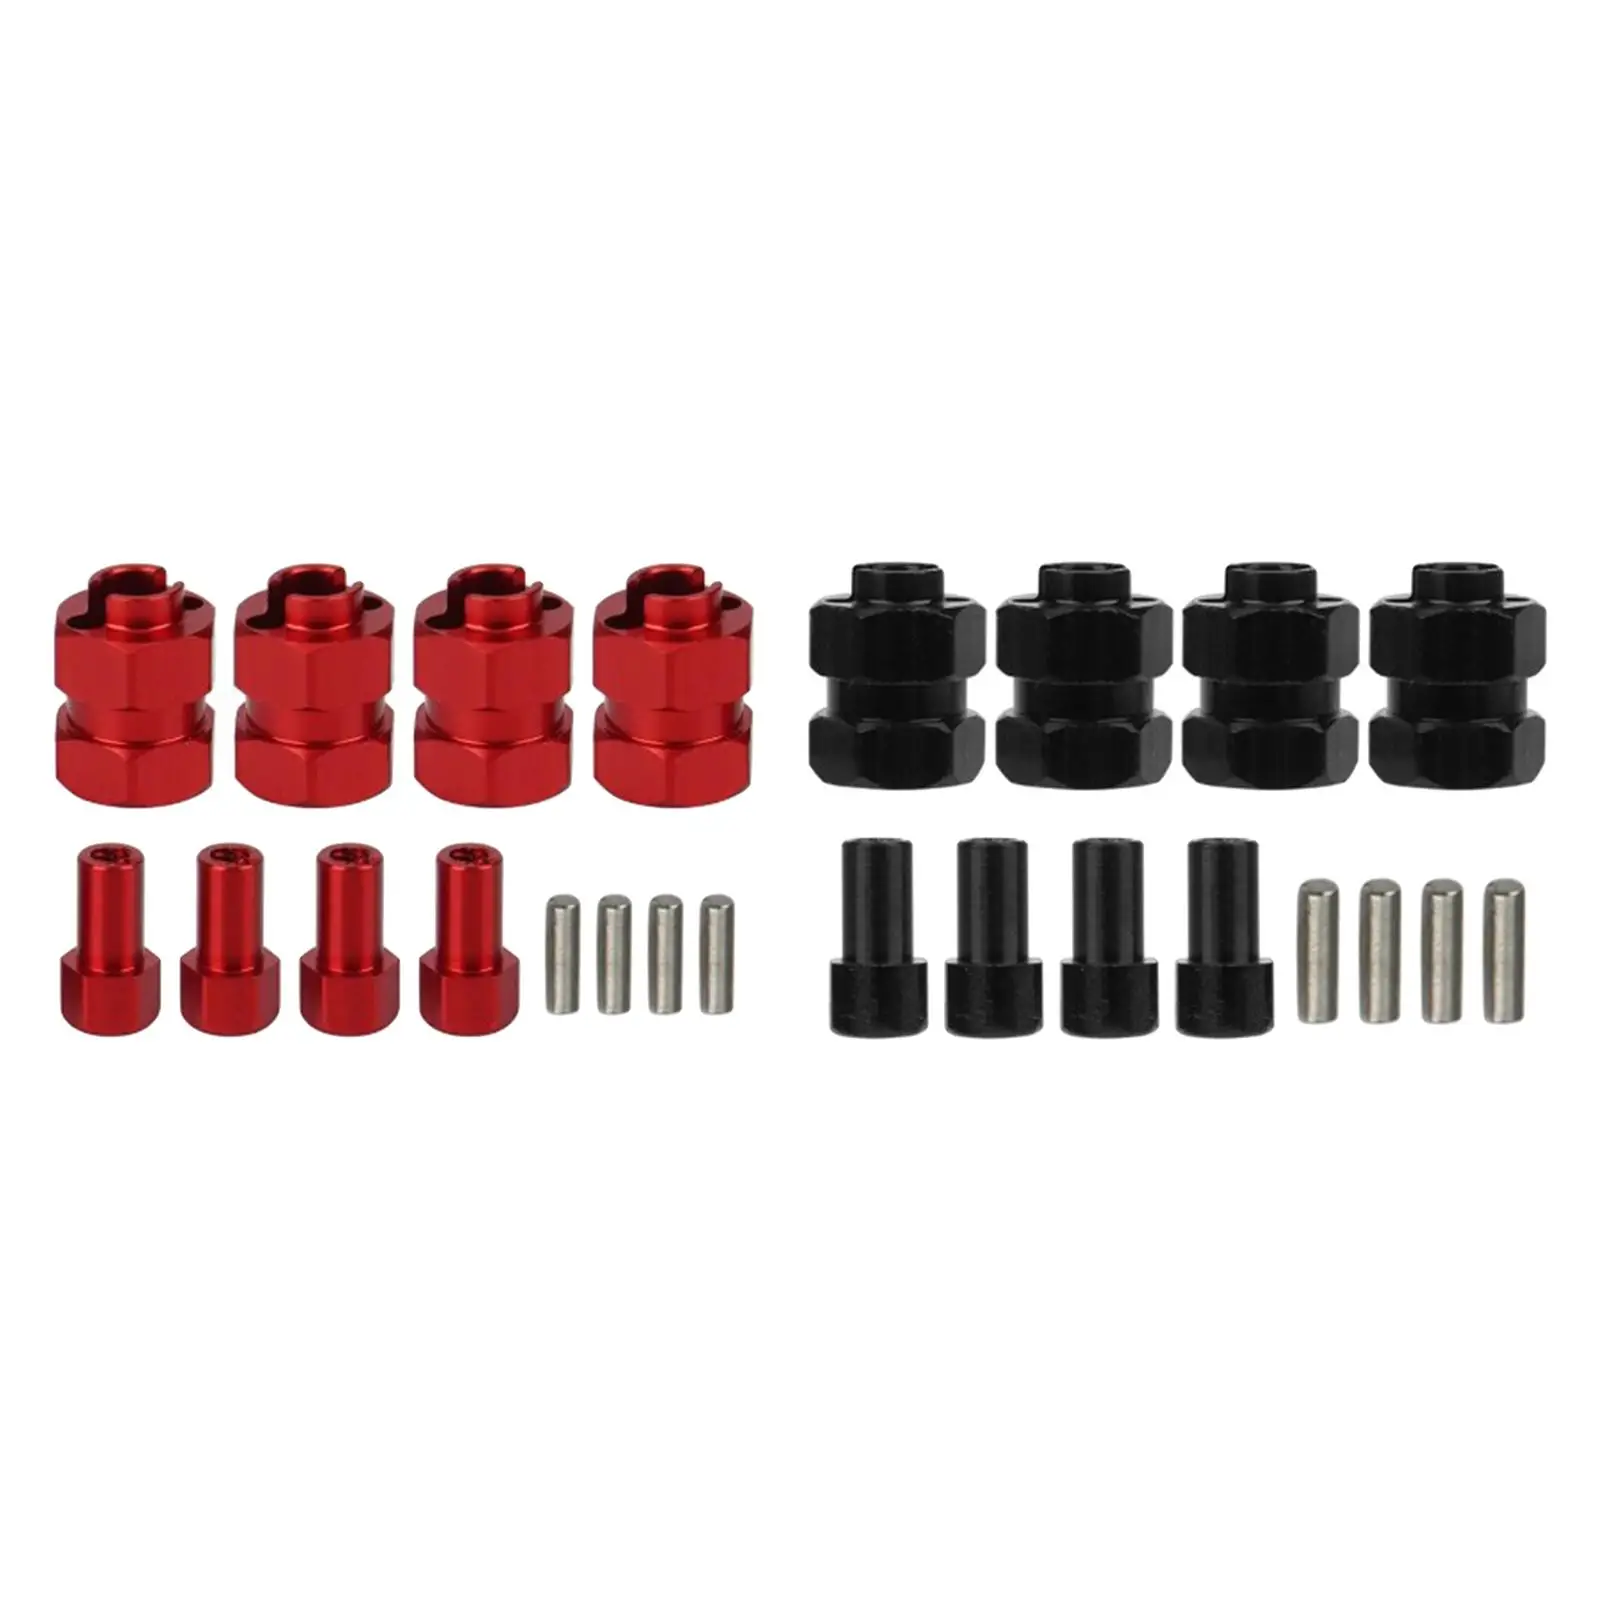 4x Brass Extended Hex Wheel Hubs Combiner Replacements for Axial Scx0081 DIY